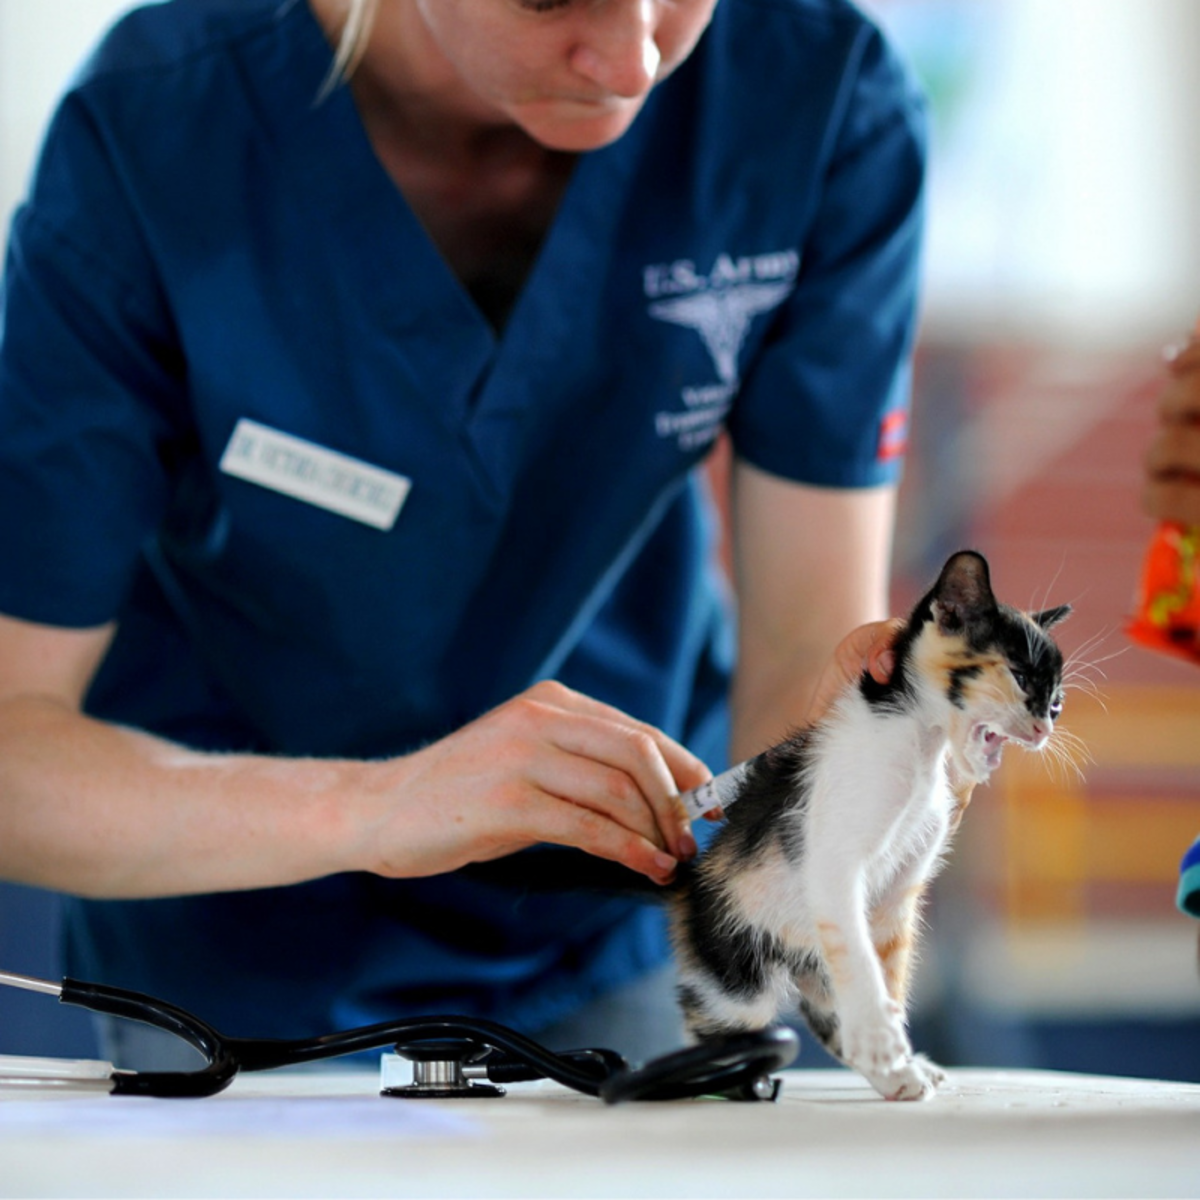 Veterinary professionals are the only individuals qualified to diagnose or treat serious health issues in dogs and cats. 